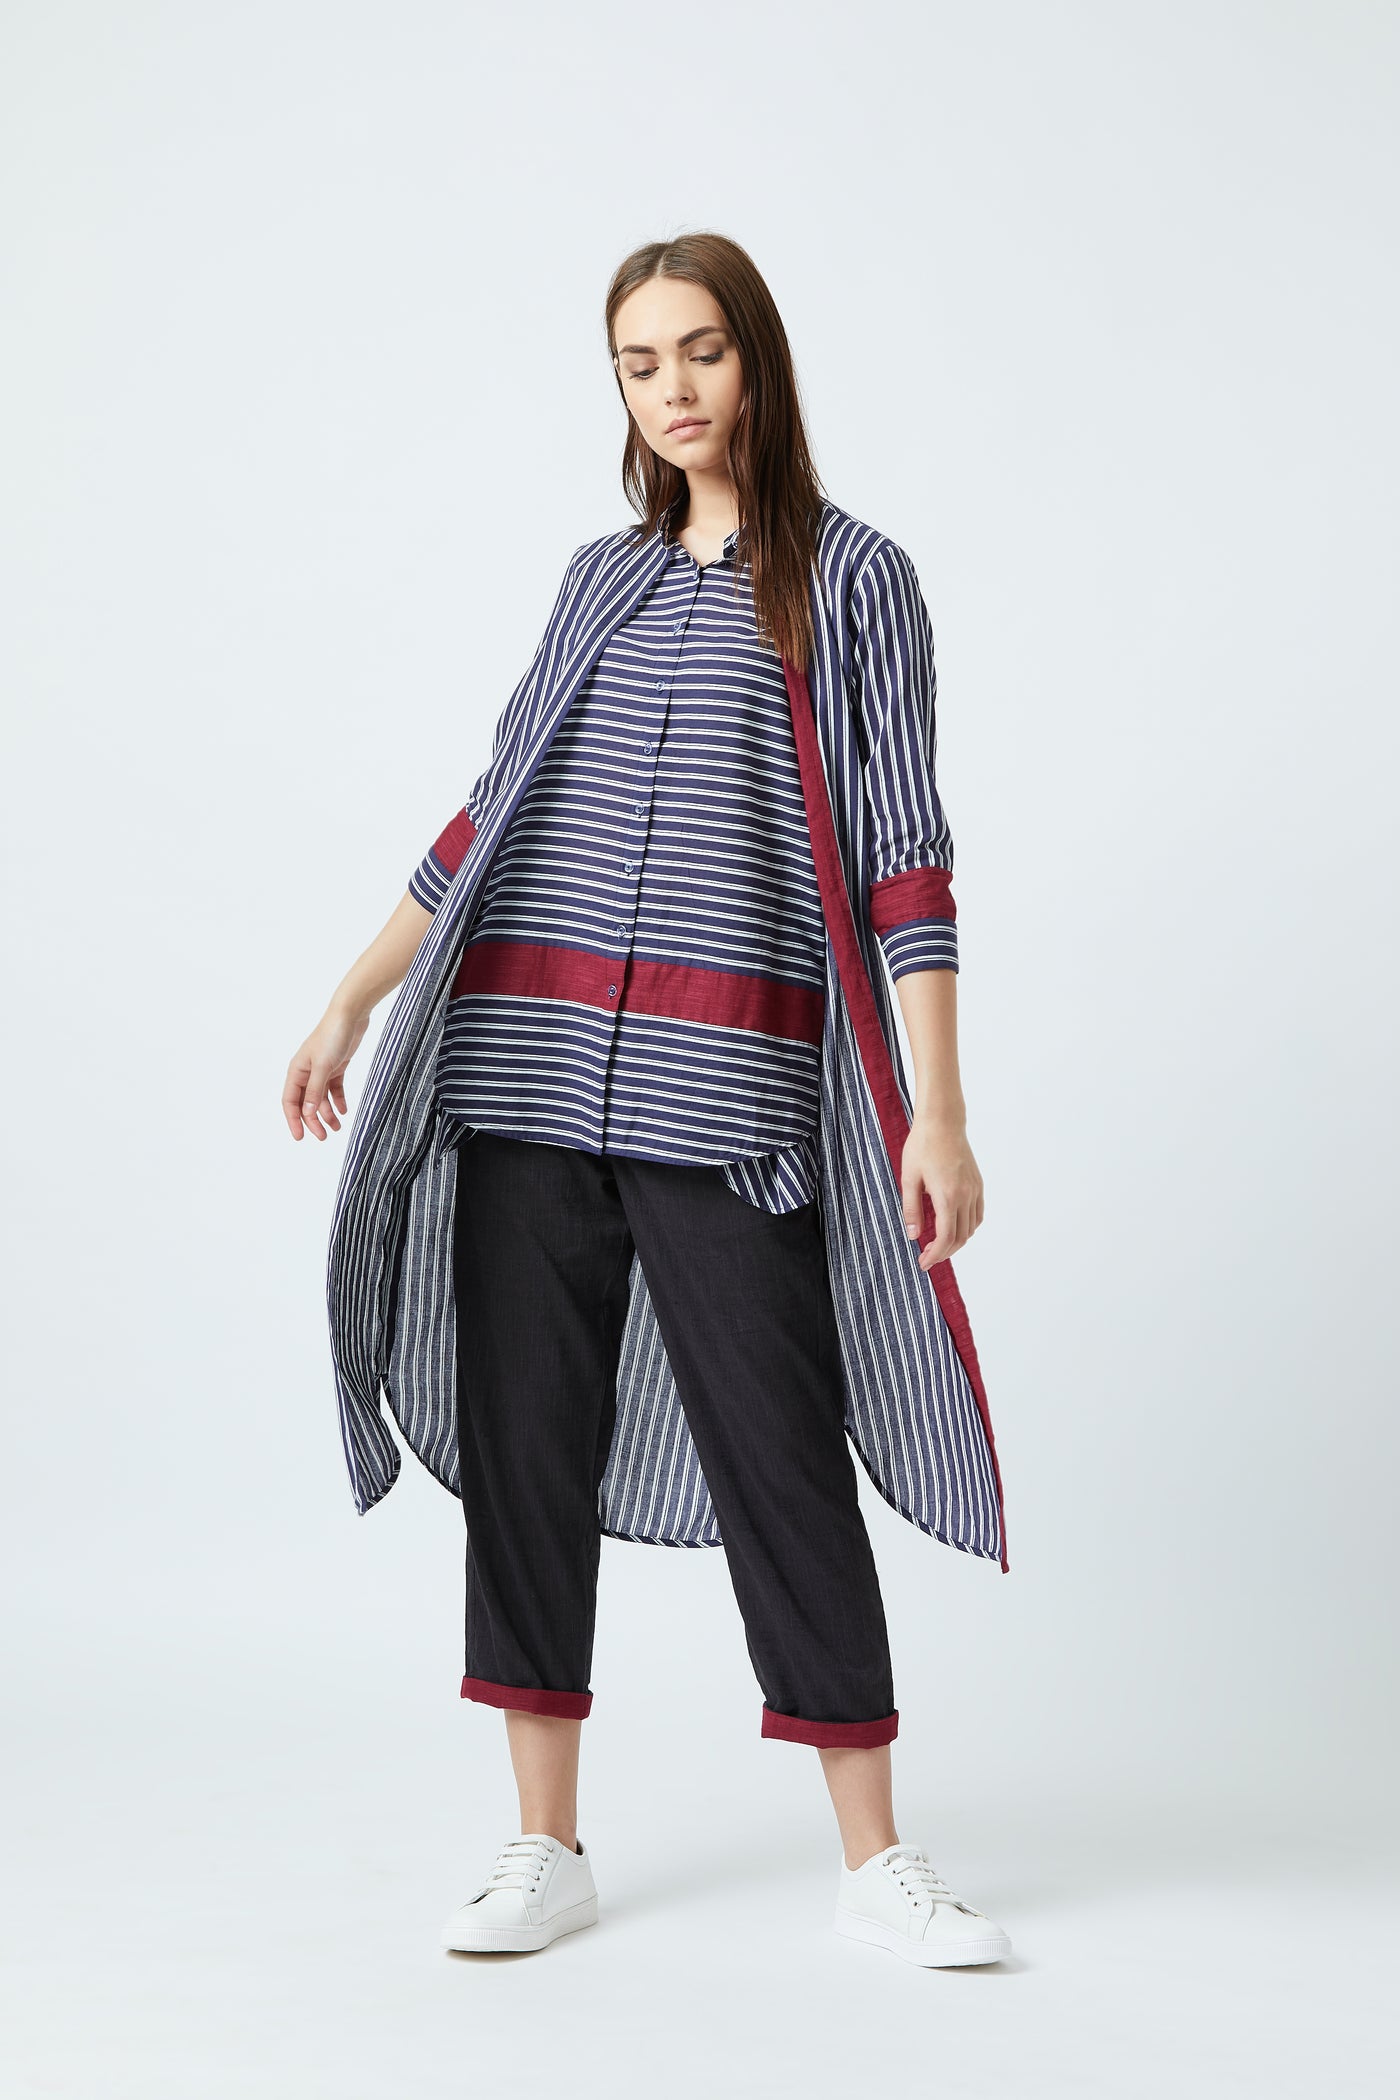 A blue tunic with white stripes and red detailing.